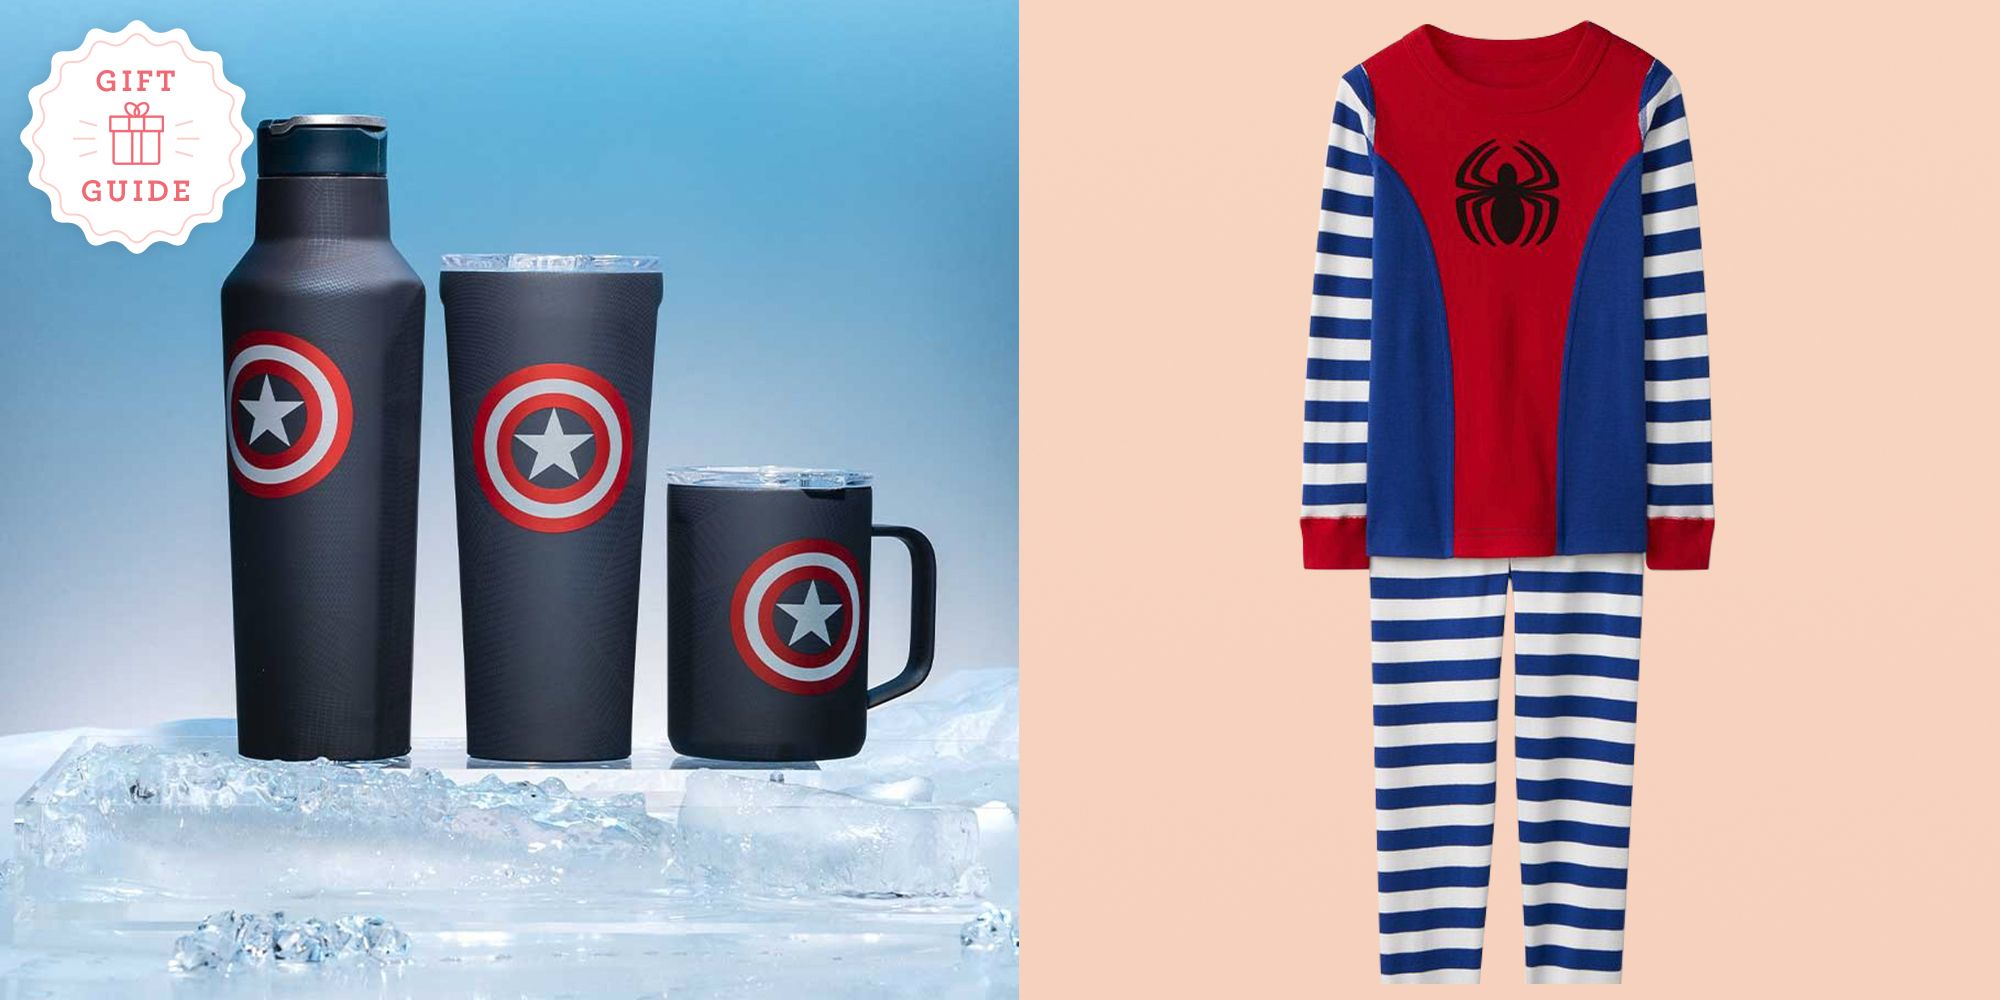 22 Of The Best Marvel Gifts To Marvel Fans [Gift Guide]